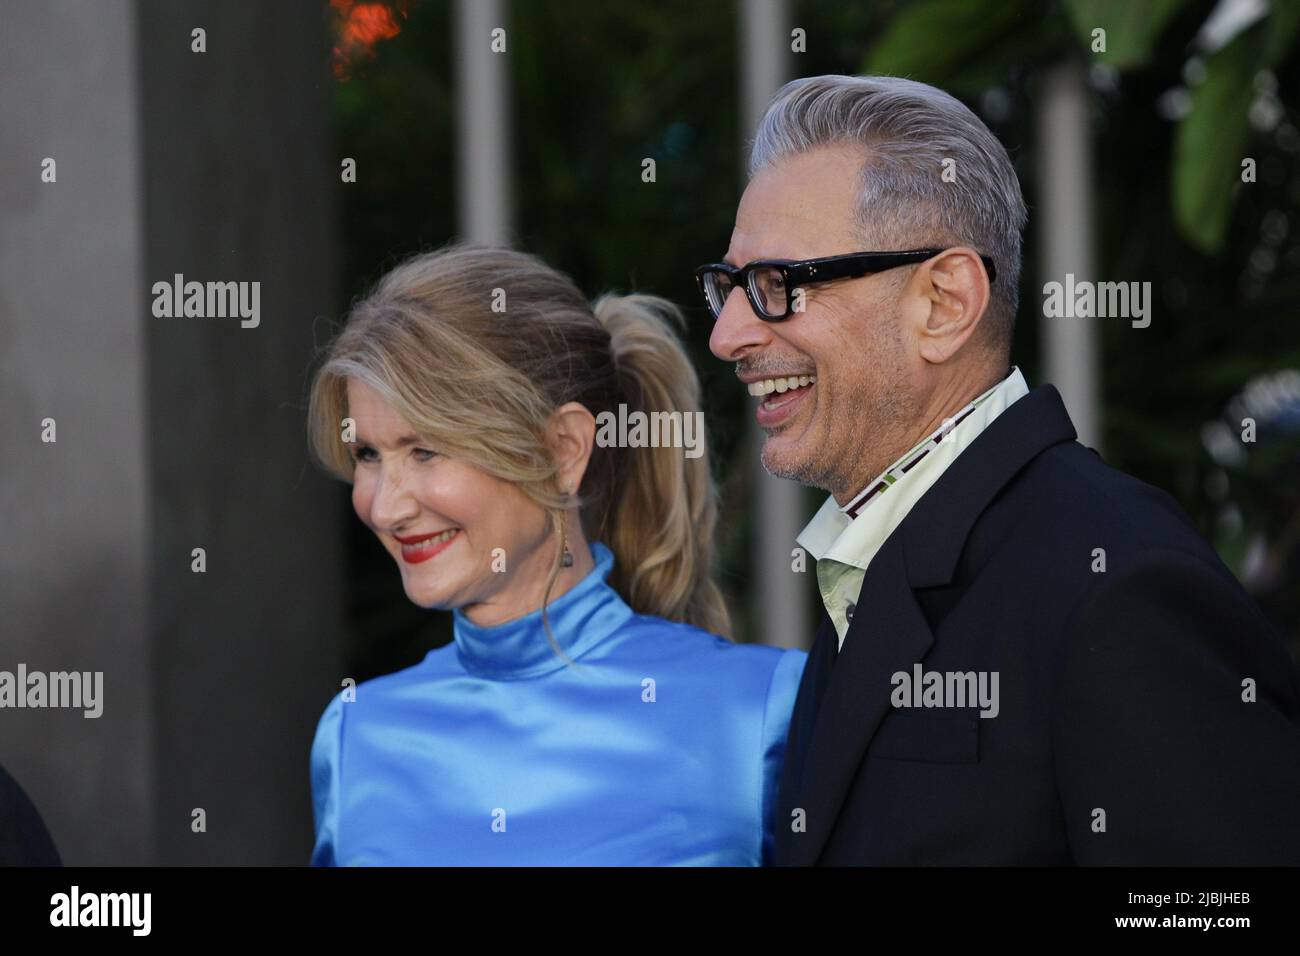 Los Angeles, USA. 07th June, 2022. Laura Dern, Jeff Goldblum at "Jurassic World: Dominion" World Premiere held at the TCL Chinese Theatre, Hollywood, CA, June 6, 2022. Photo Credit: Joseph Martinez/PictureLux Credit: PictureLux/The Hollywood Archive/Alamy Live News Stock Photo